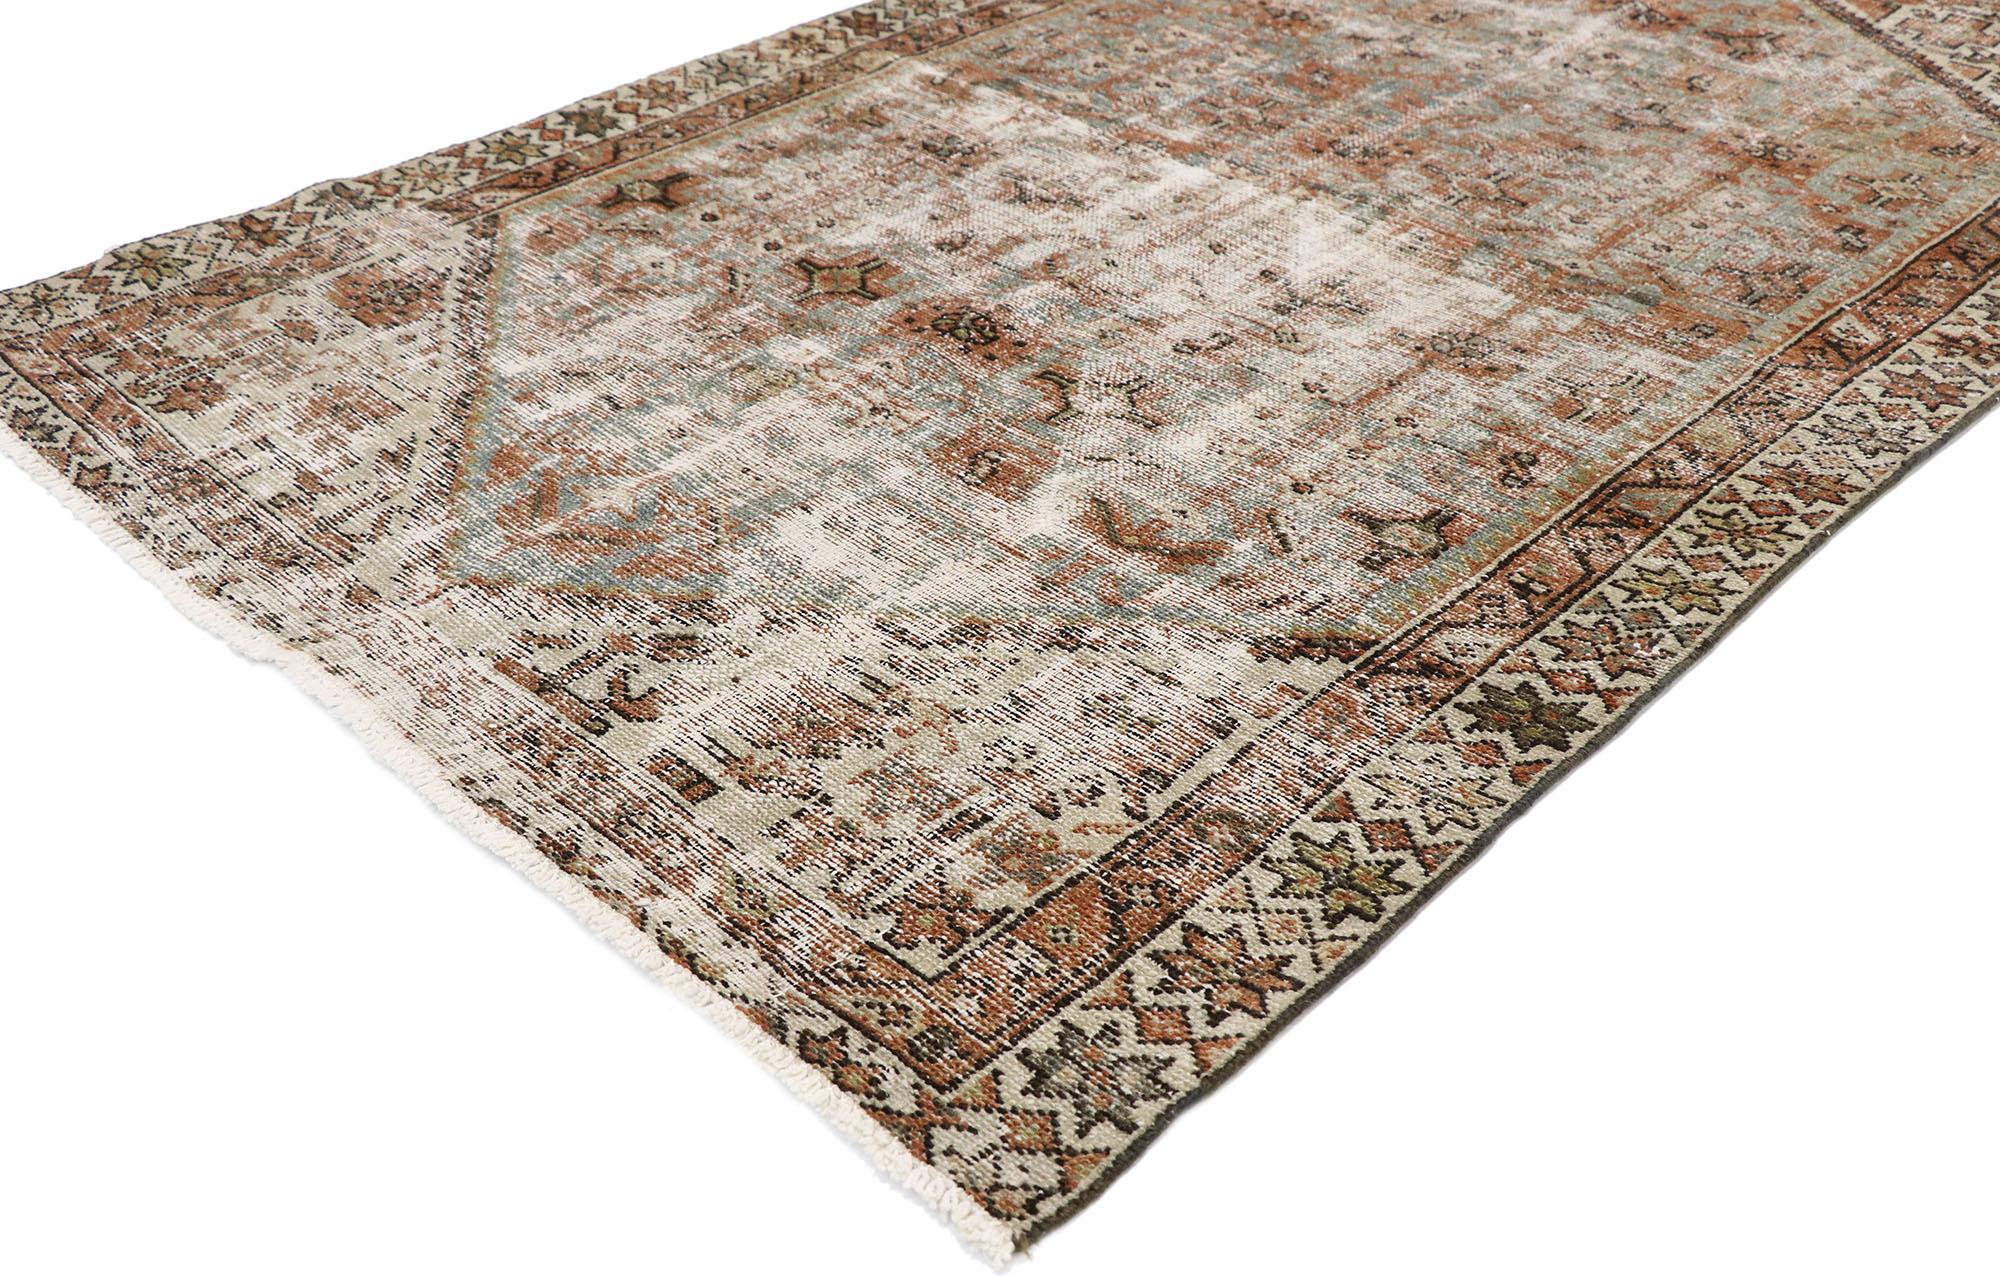 60830, distressed antique Persian Hamadan rug with modern rustic artisan style. Warm and inviting with a lovingly time-worn composition, this hand-knotted wool distressed antique Persian Hamadan rug will take on a curated lived-in look that feels